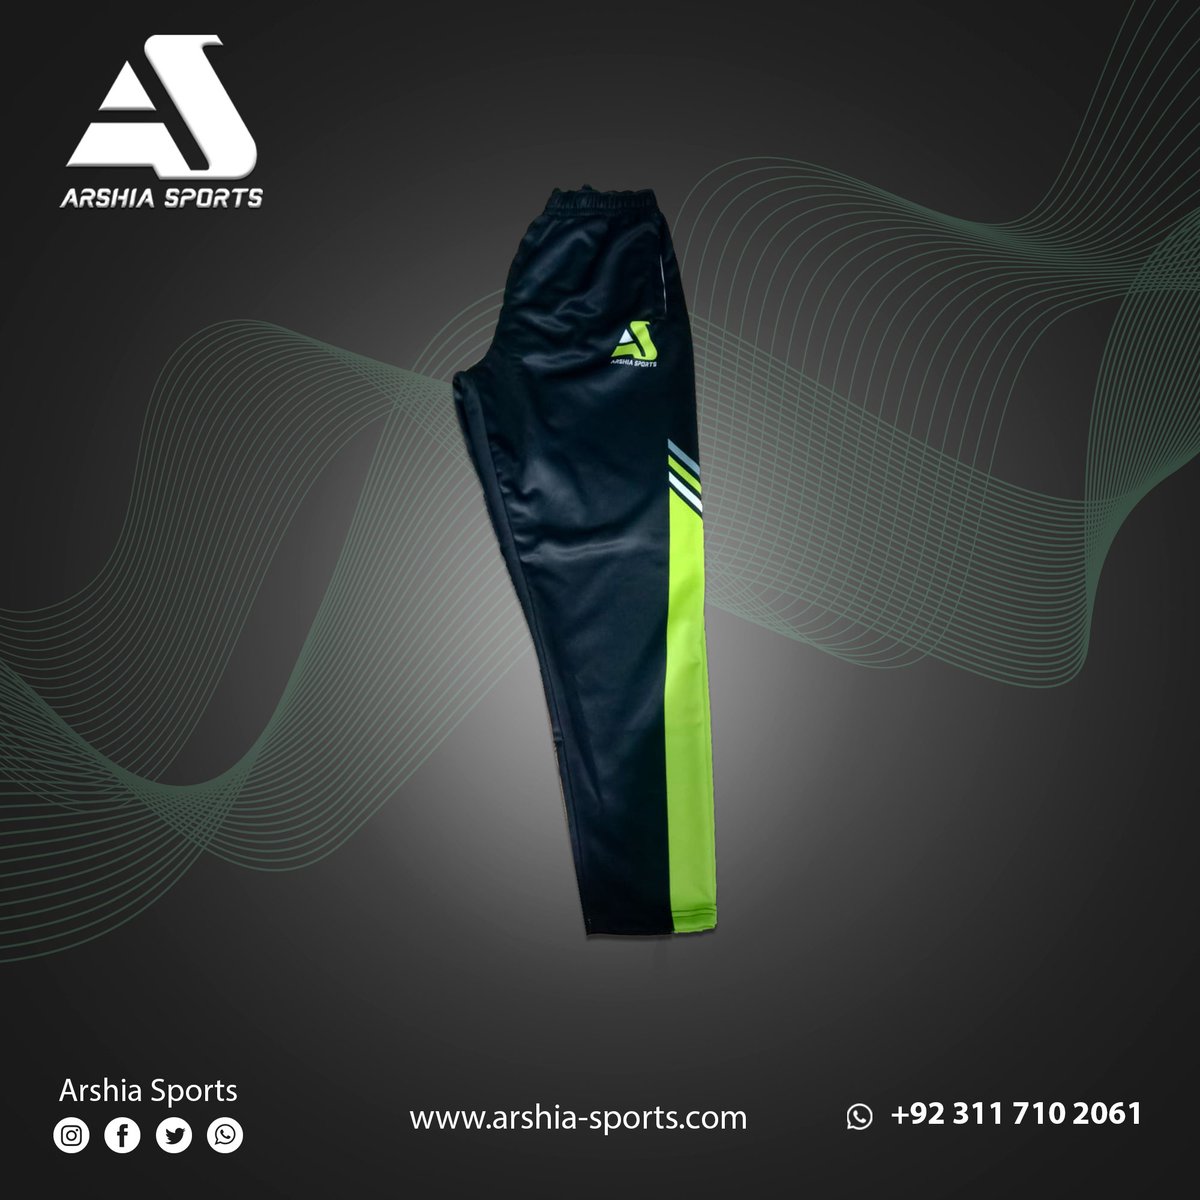 Arshia Sports
Trousers
#trouser #mentrousers #fashiontrouser #newtrouserdesign #casualtrouser #sportstrouser #gymtrouser #crickettrousers #womentrouser #girlstrousers #boystrouser #trousershops #trouserstore #trouserformen #canada #uk #france #germany #italy #unine #grace